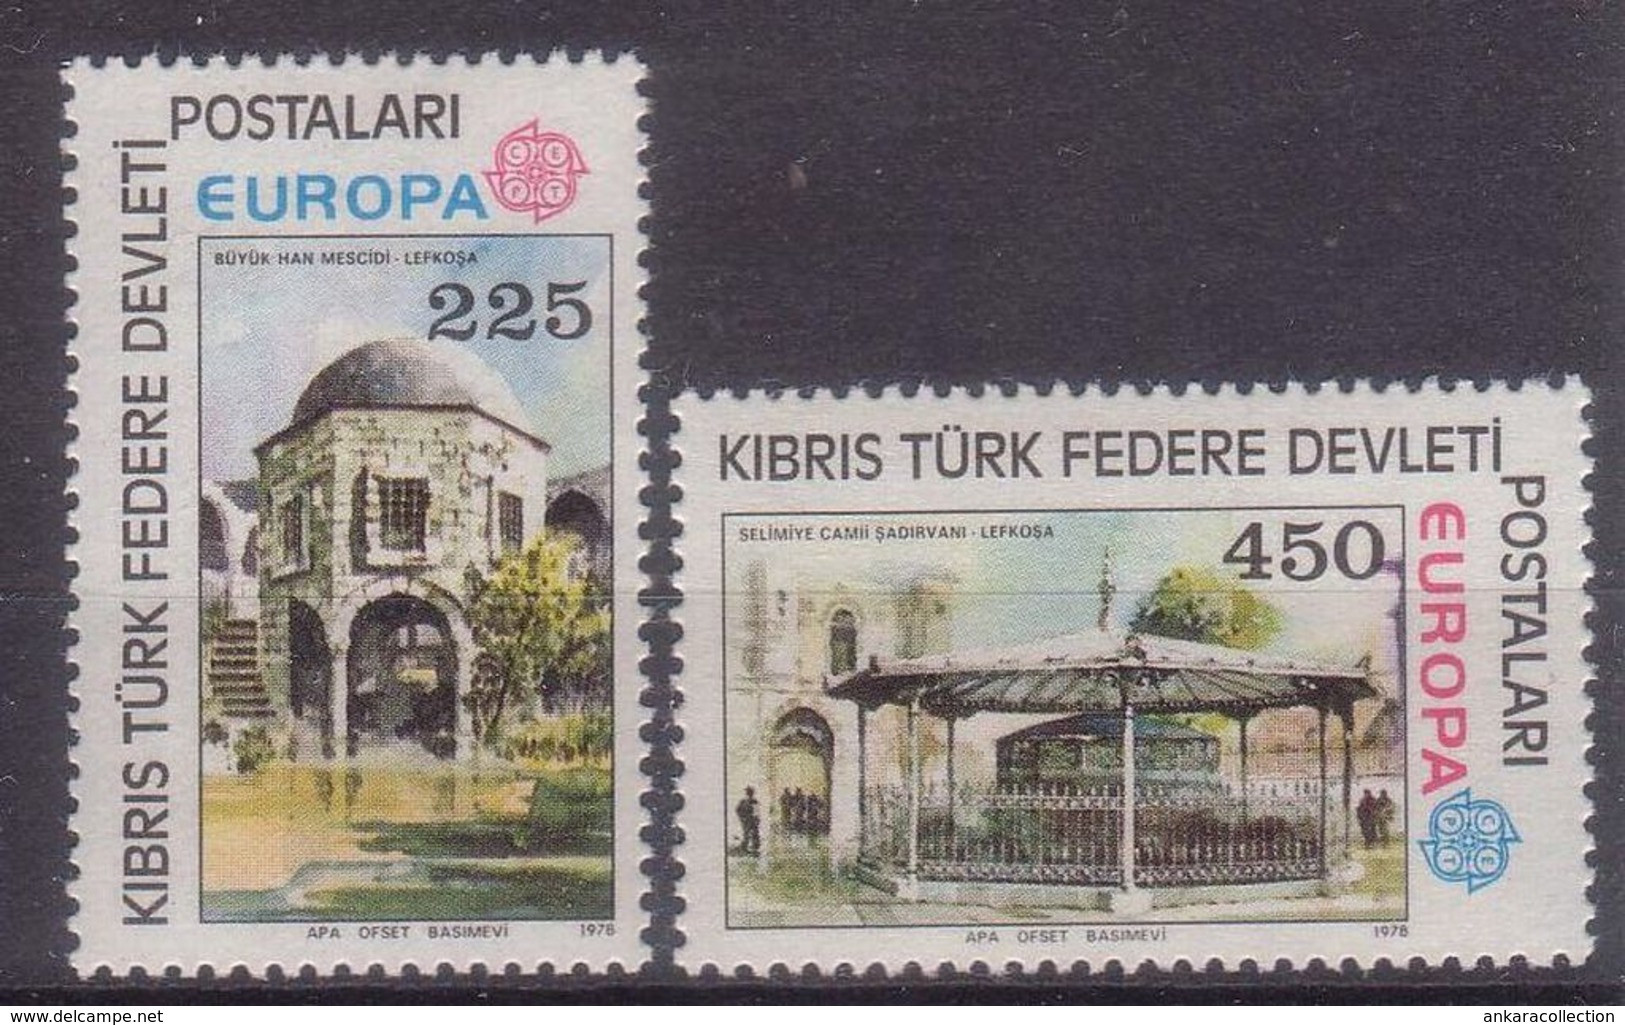 AC - NORTHERN CYPRUS STAMP - EUROPA CEPT MNH LEFKOSA 02 MAY 1978 - Unused Stamps